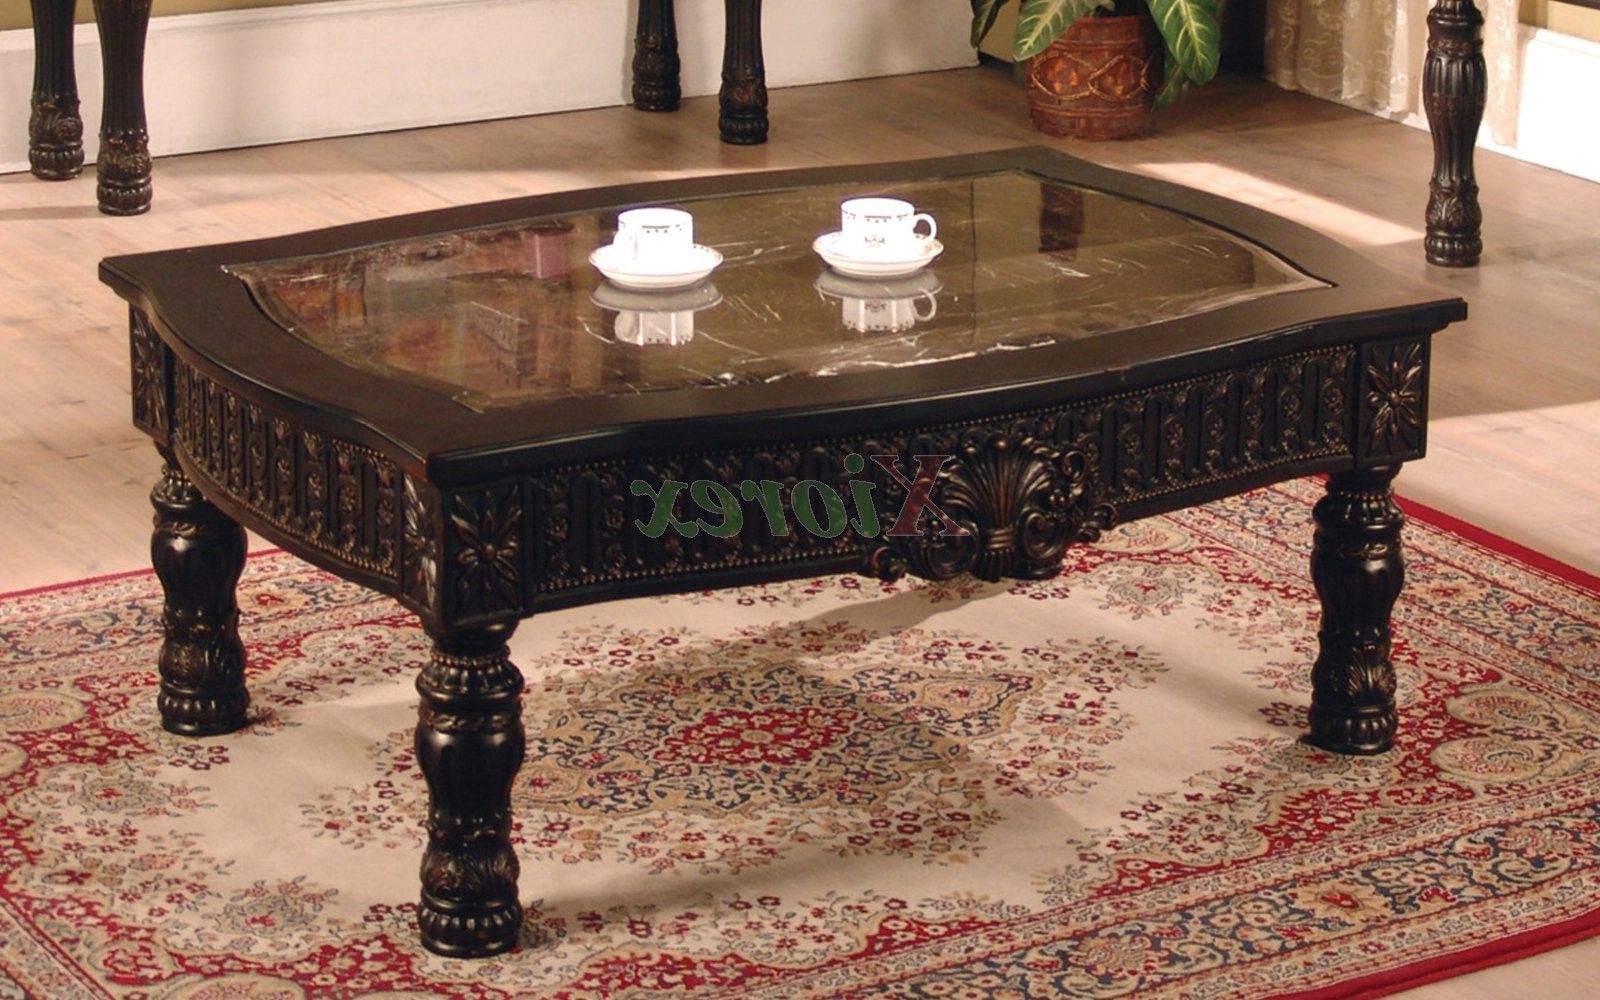 Ajax Rectangle Coffee Table With Faux Marble Top Inlay (View 16 of 20)